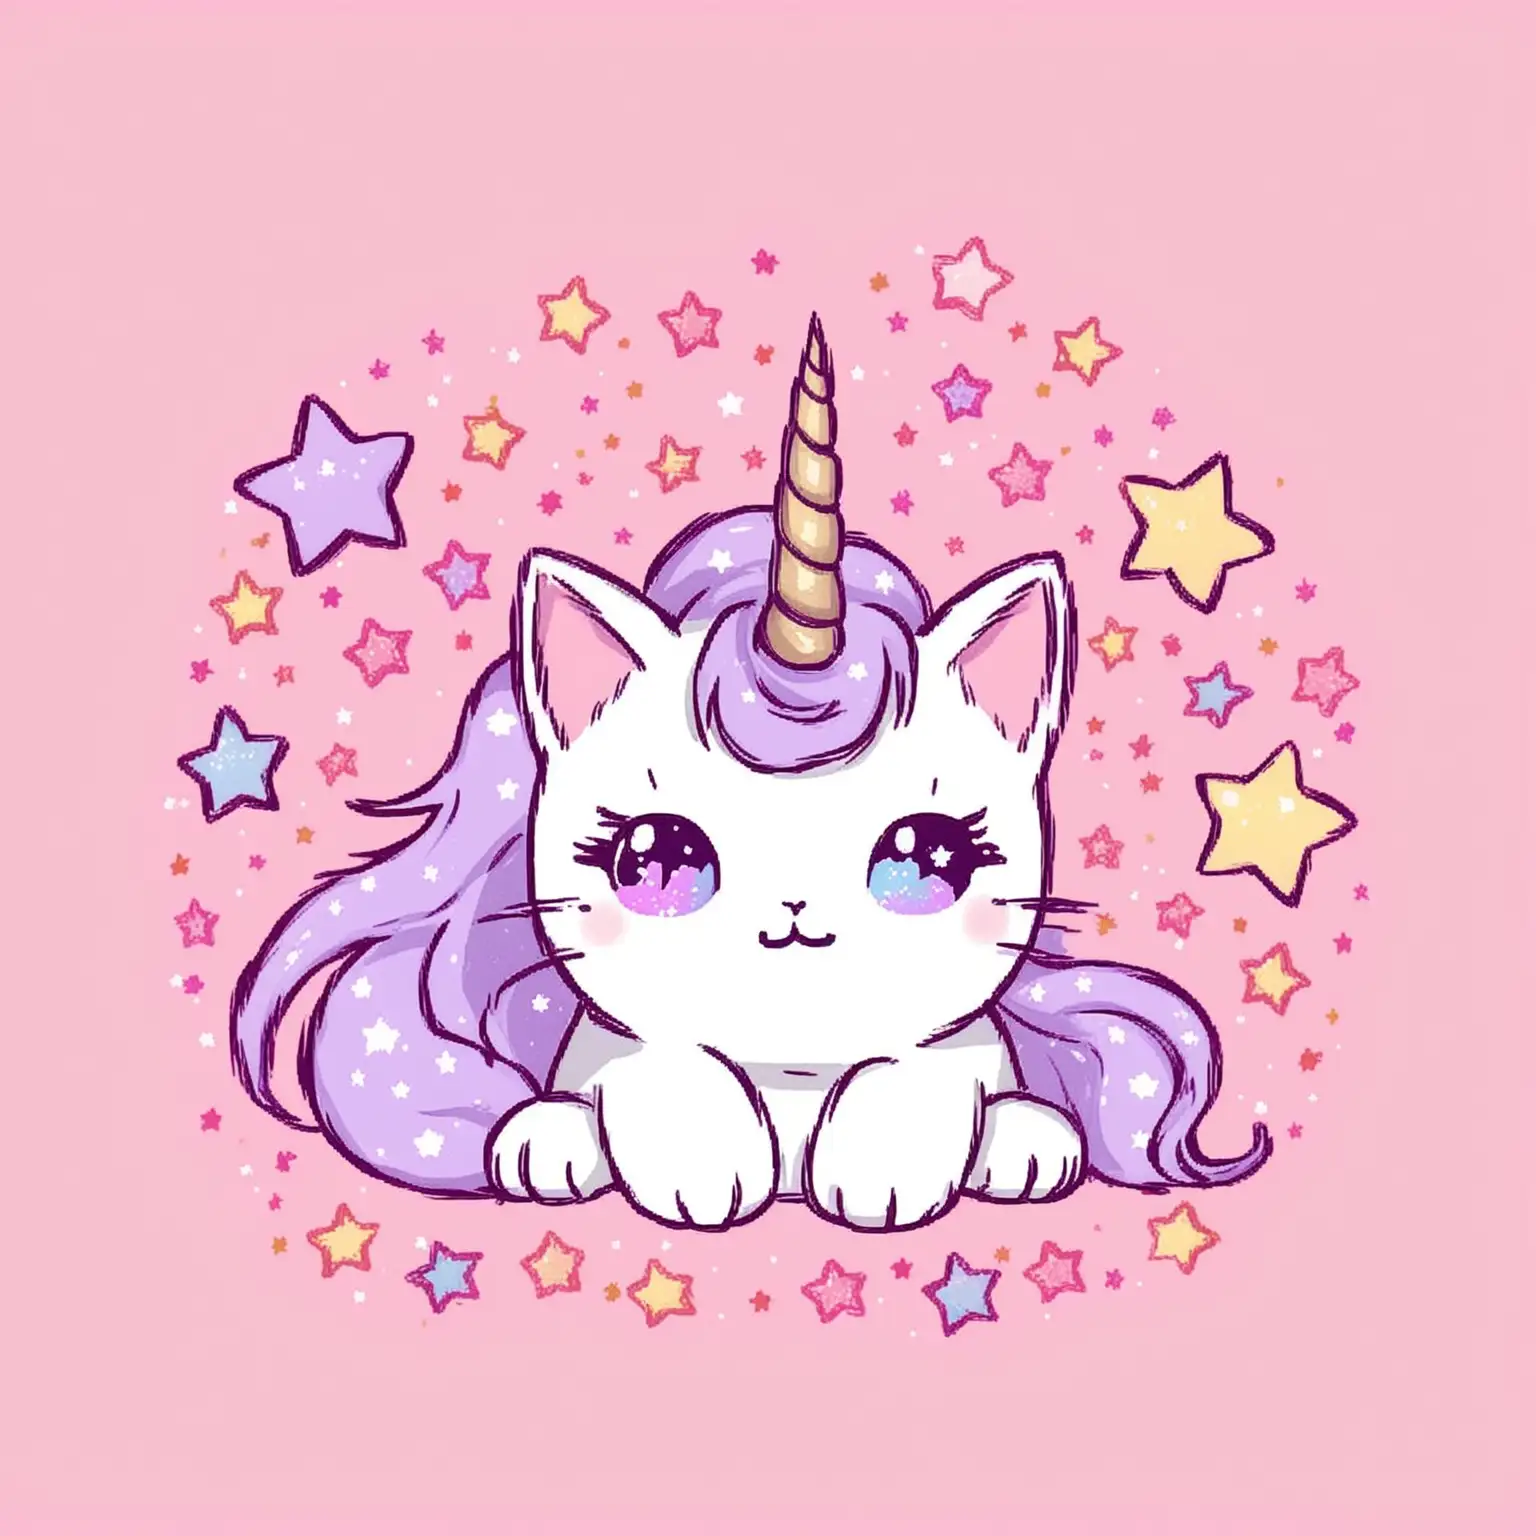 Cat with unicorn horn pink background with stars cute with cat smaller in the middle